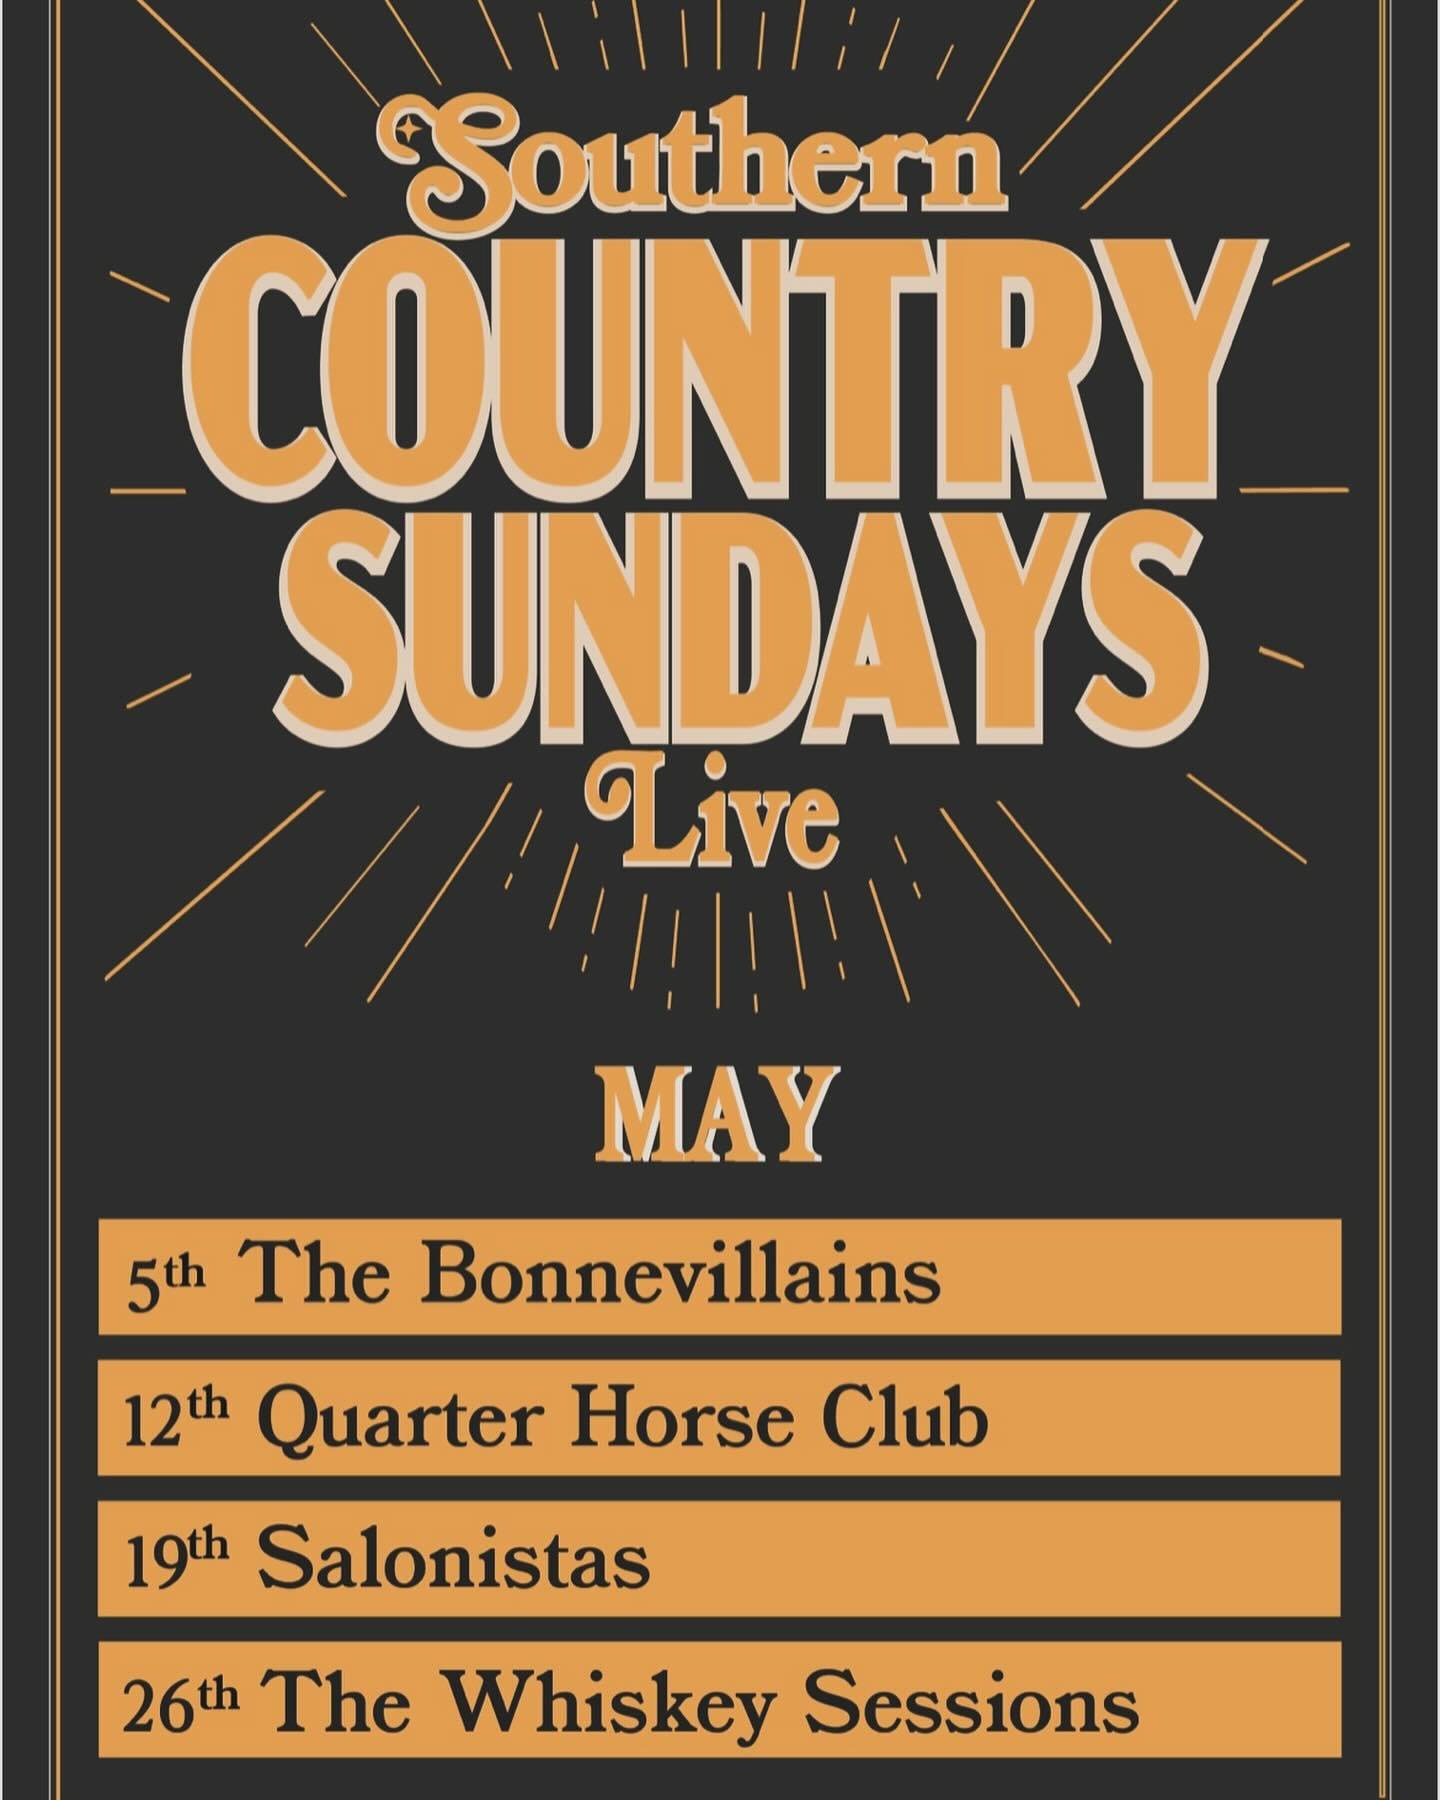 Get ready! Country Sundays for May is looking splendid. Come in for a drink and boogie 🤩🕺🏼💃🏼
.
.
.
#berrynsw #southcoastnsw #visitberry